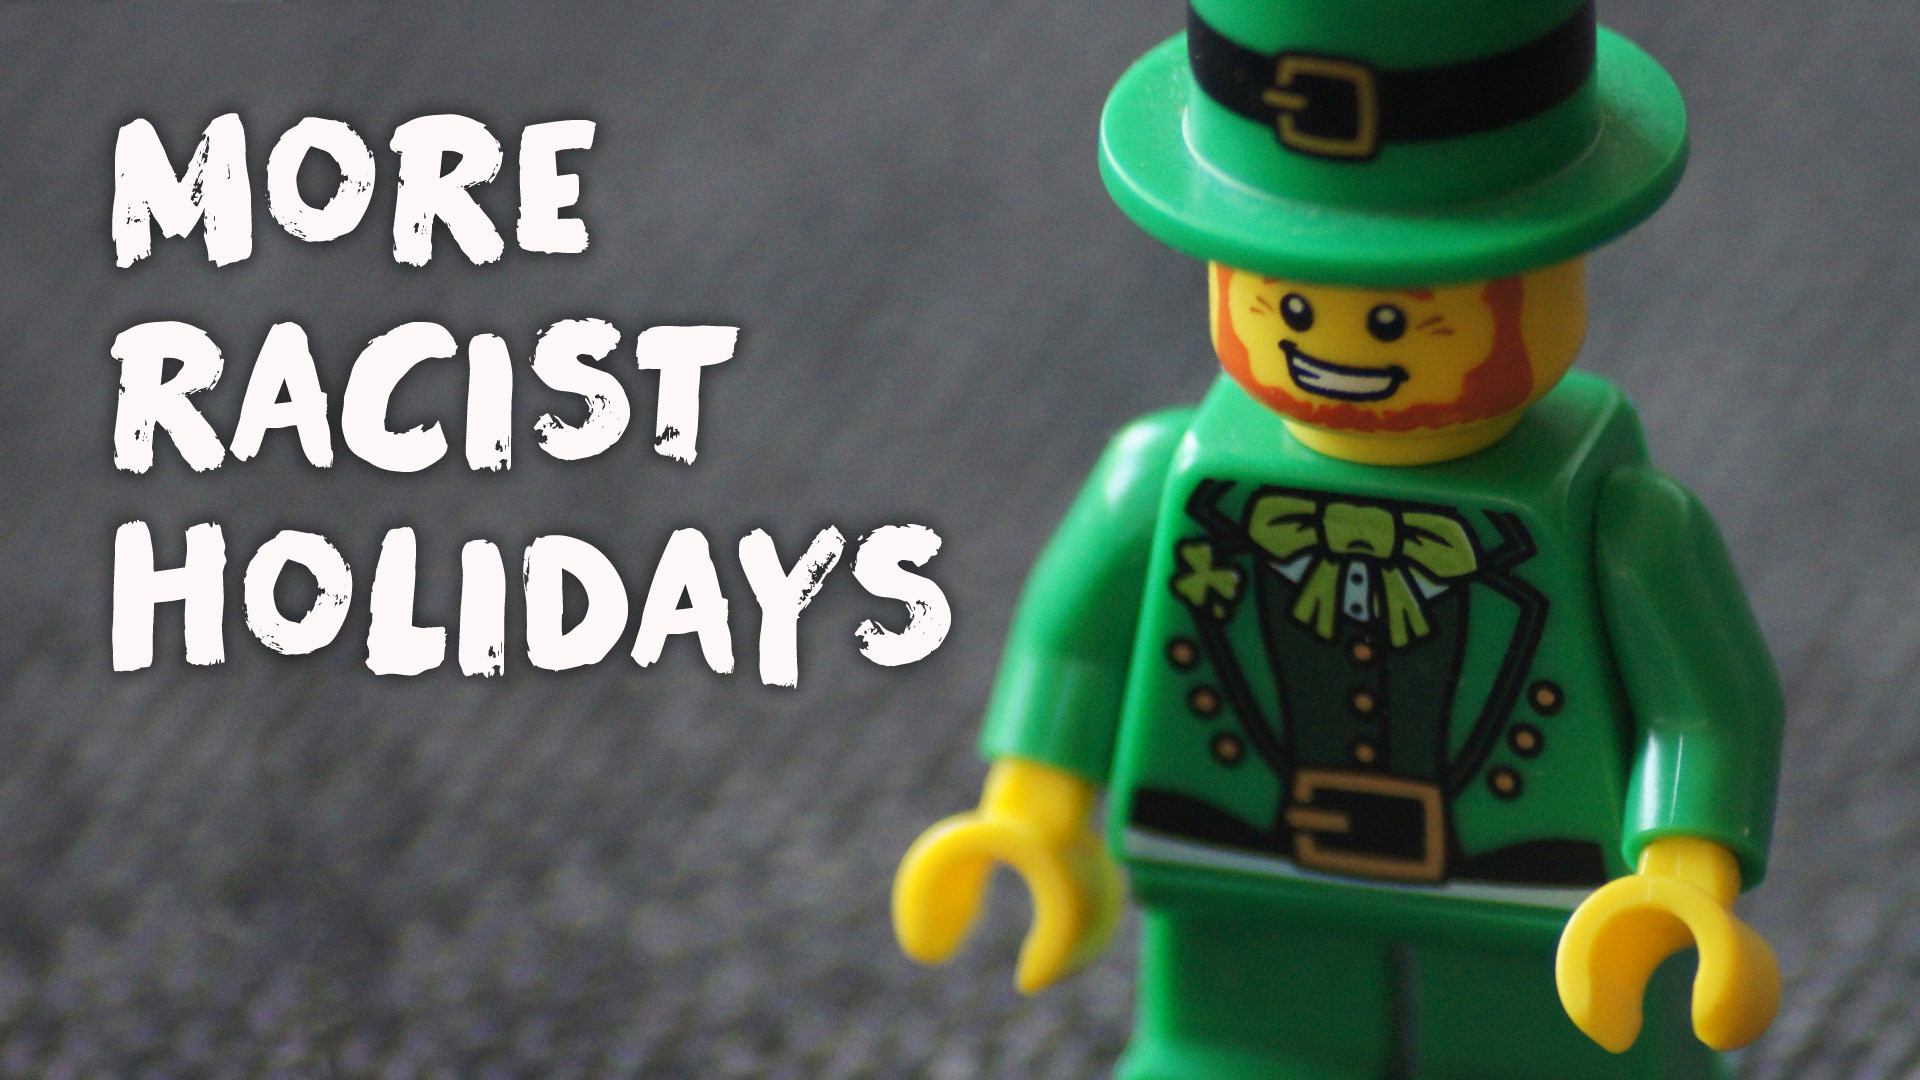 1920x1080 More Racist Holidays Besides St. Patrick's Day